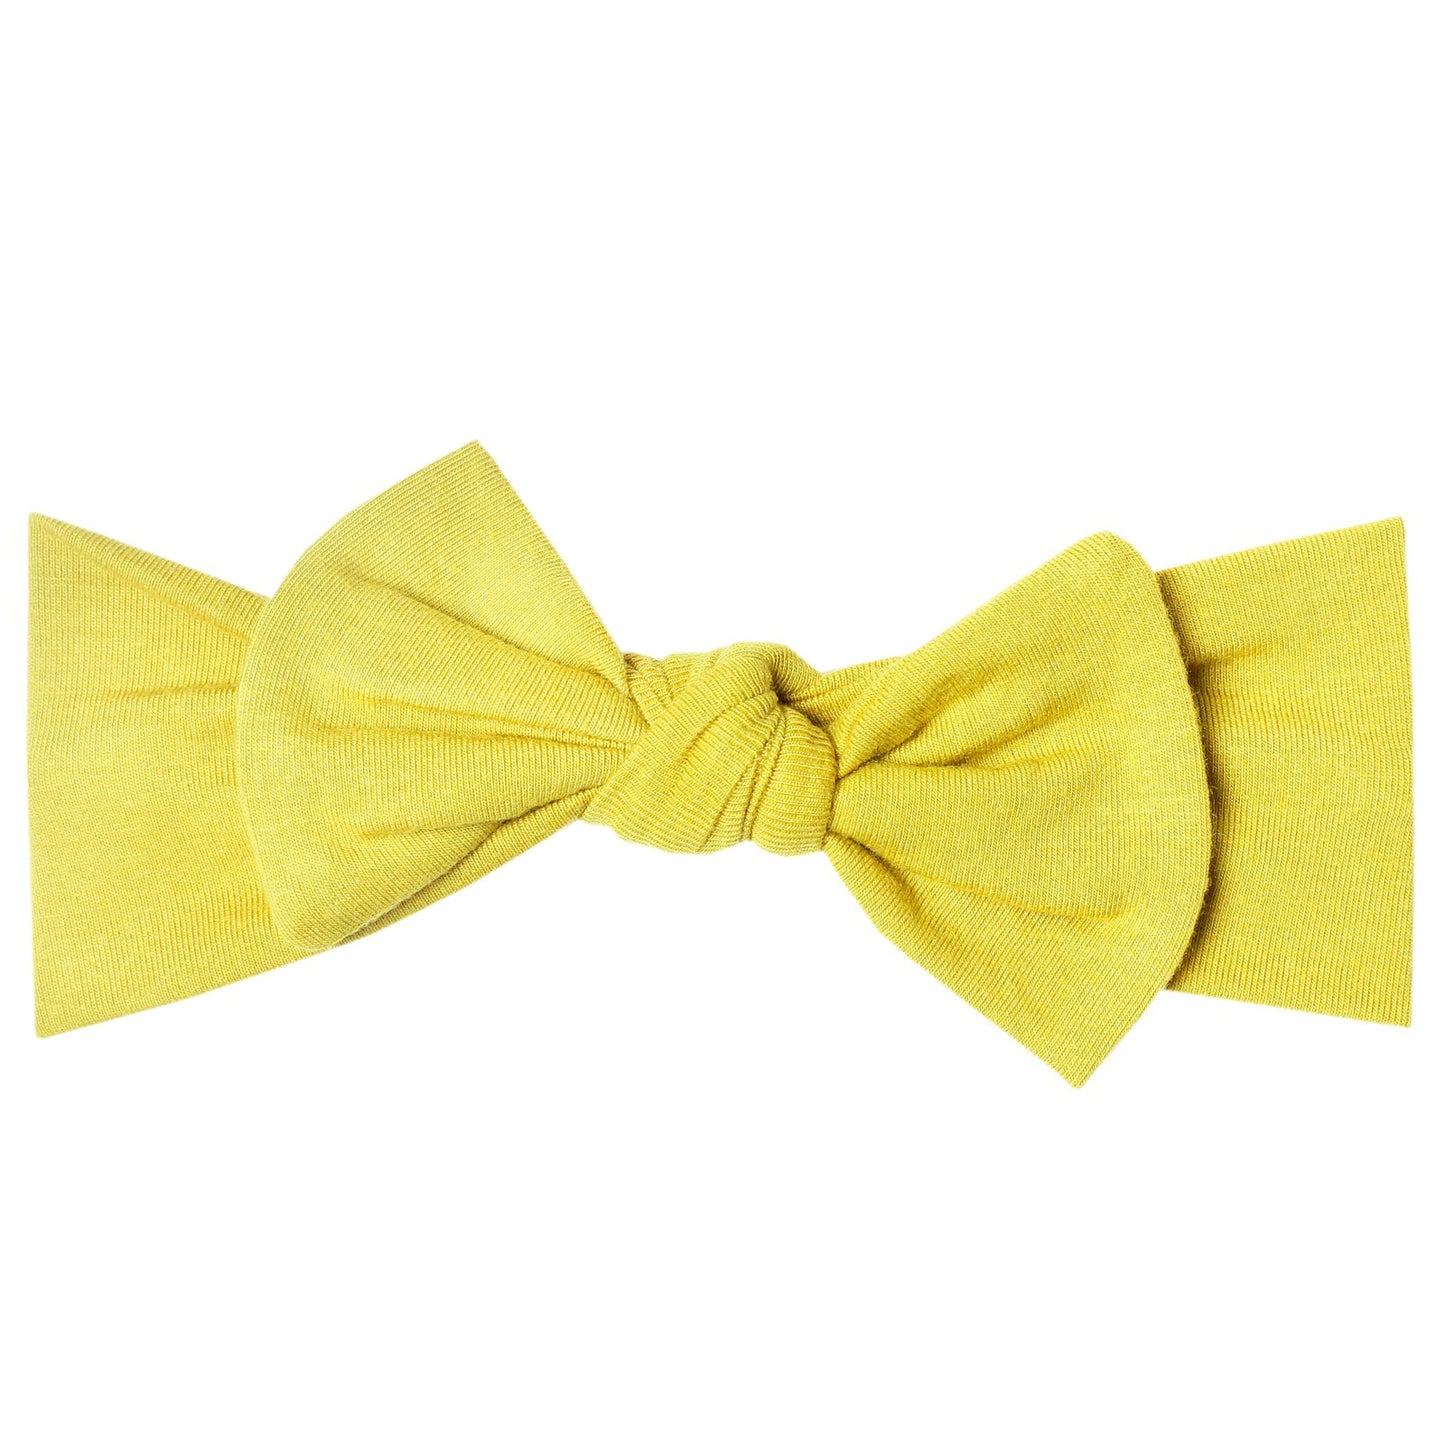 Squirt Knit Headband Bow  - Doodlebug's Children's Boutique